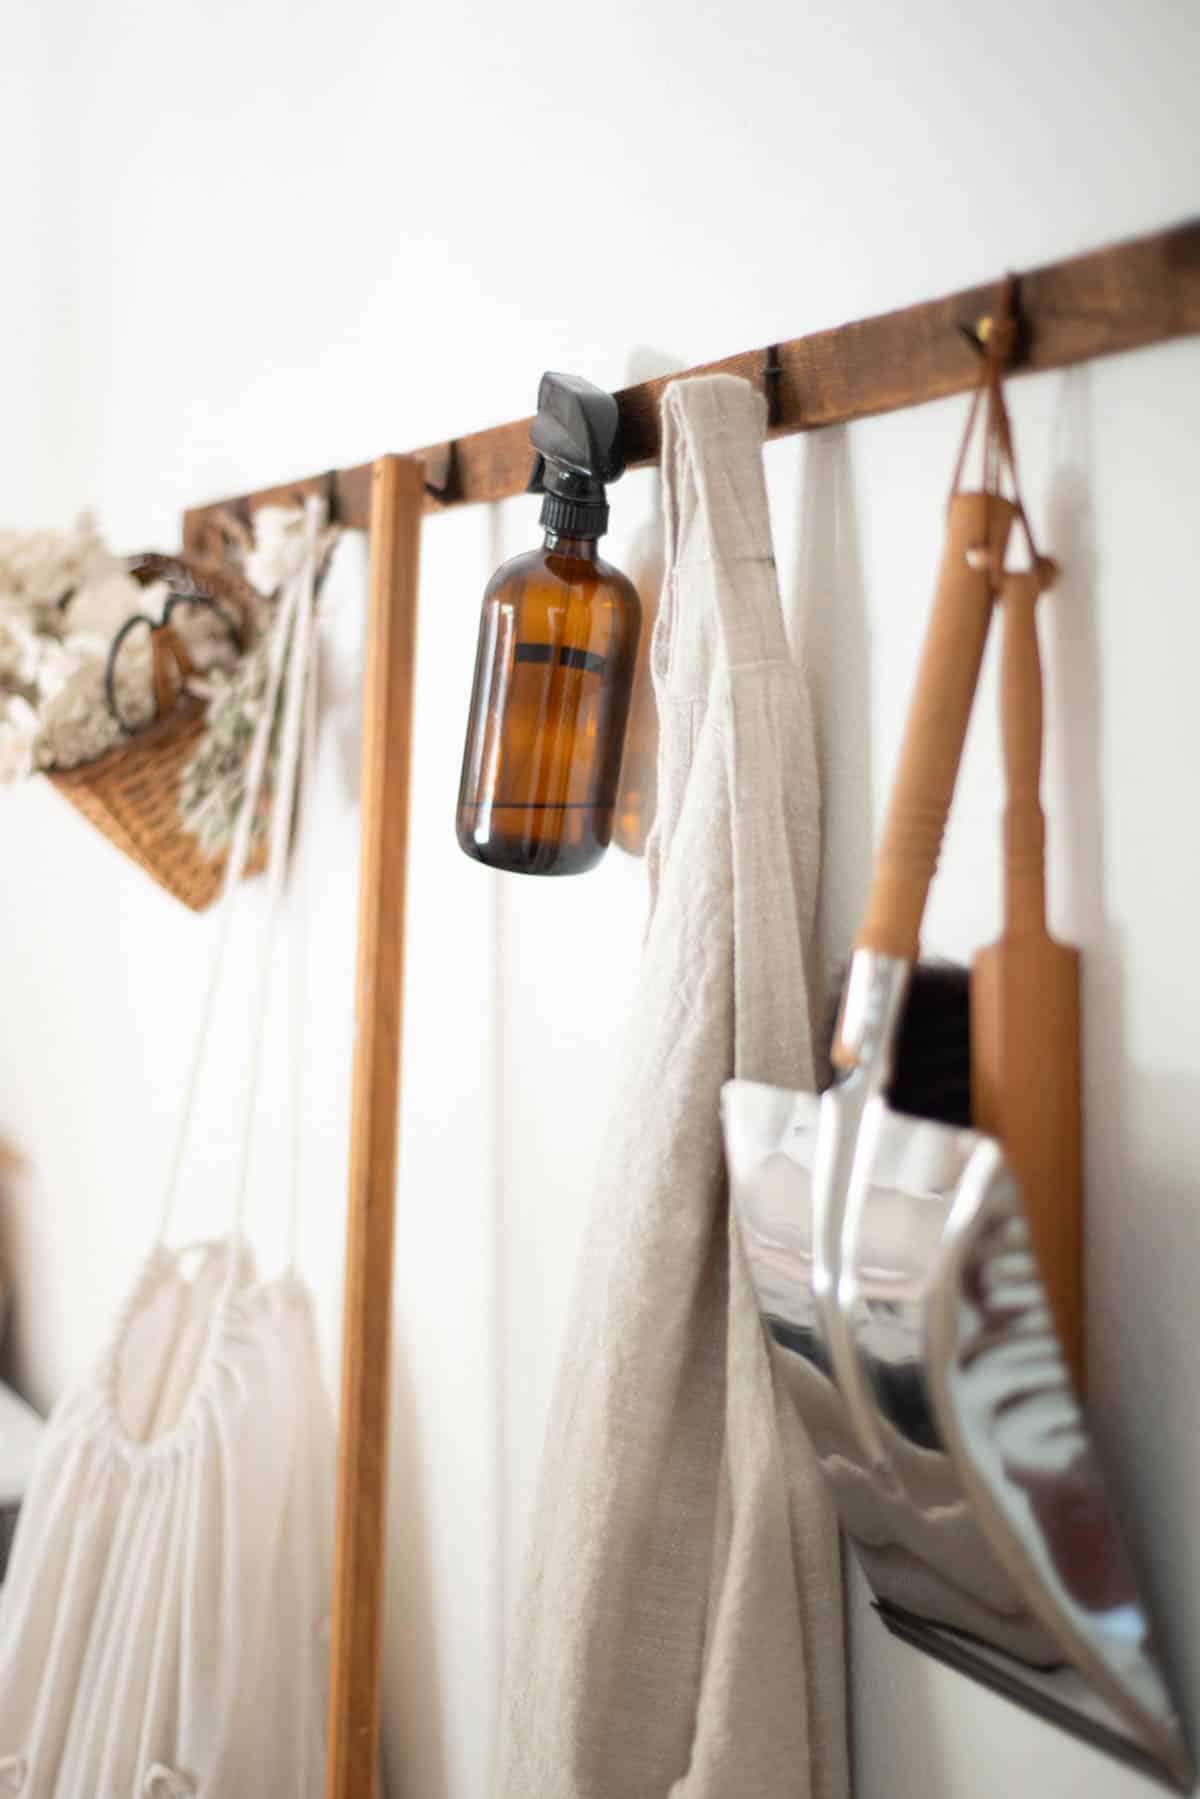 Cleaning supplies hanging from pegs on a wall.